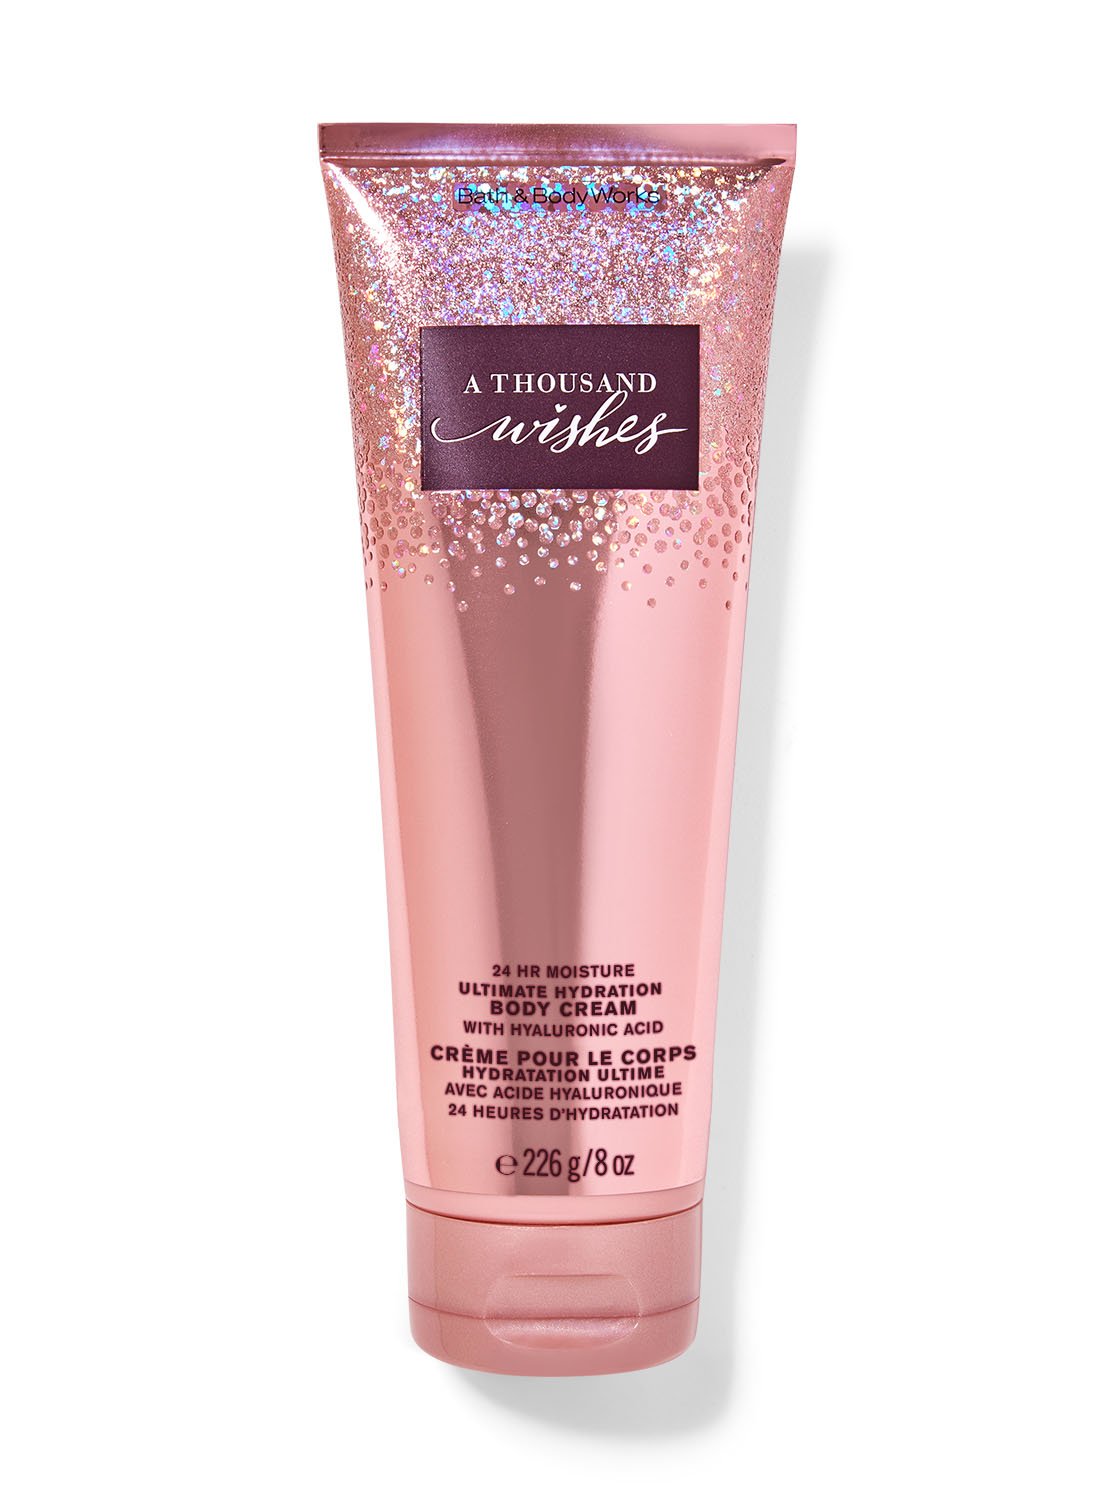 A Thousand Wishes Ultimate Hydration Body Cream | Bath and Body Works